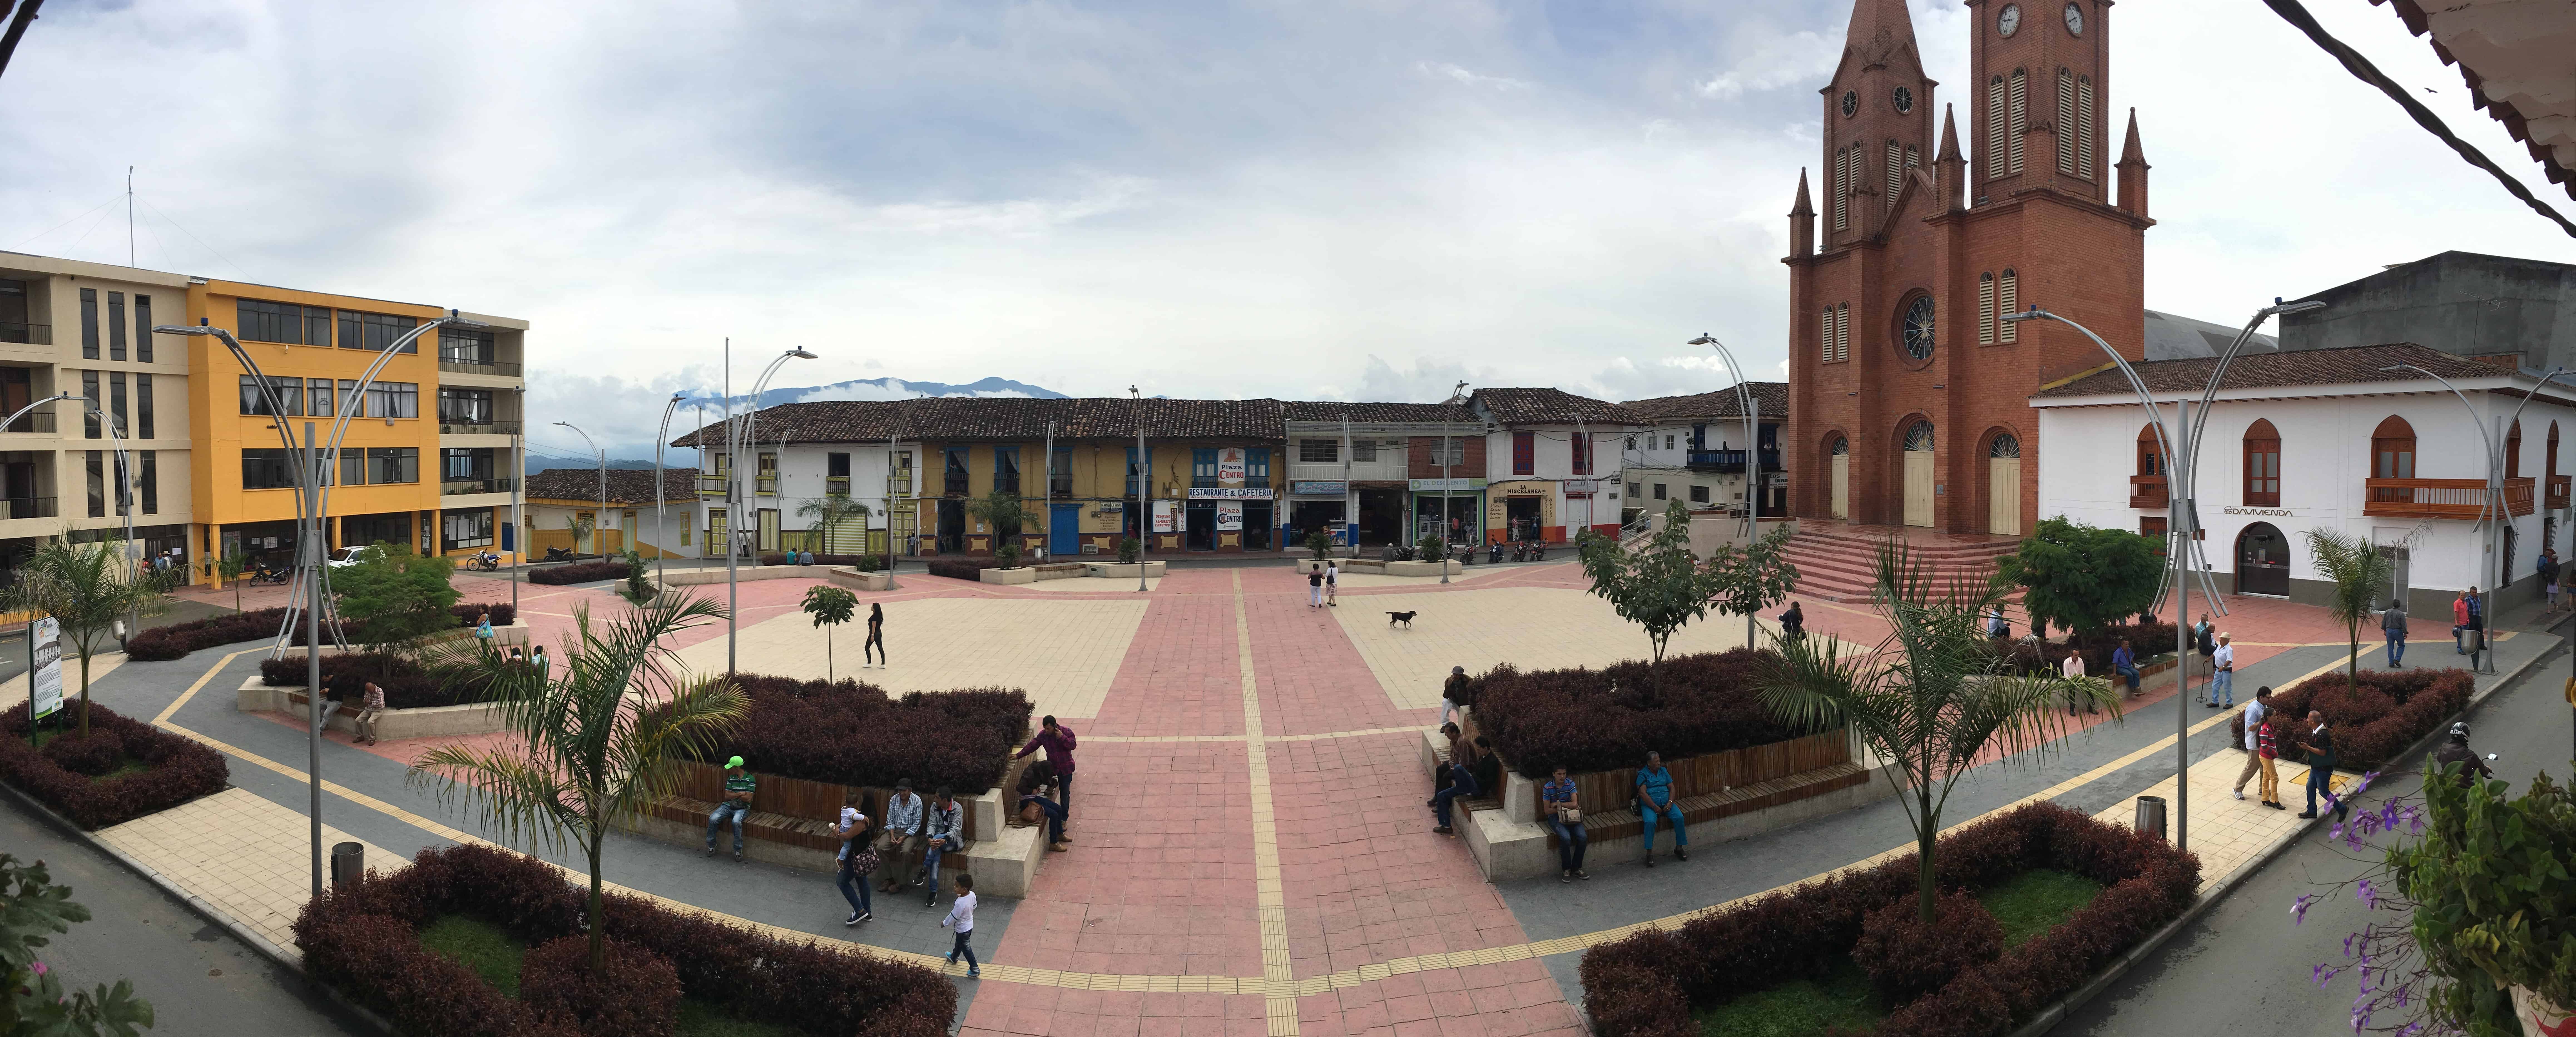 Lower plaza in Anserma, Caldas, Colombia